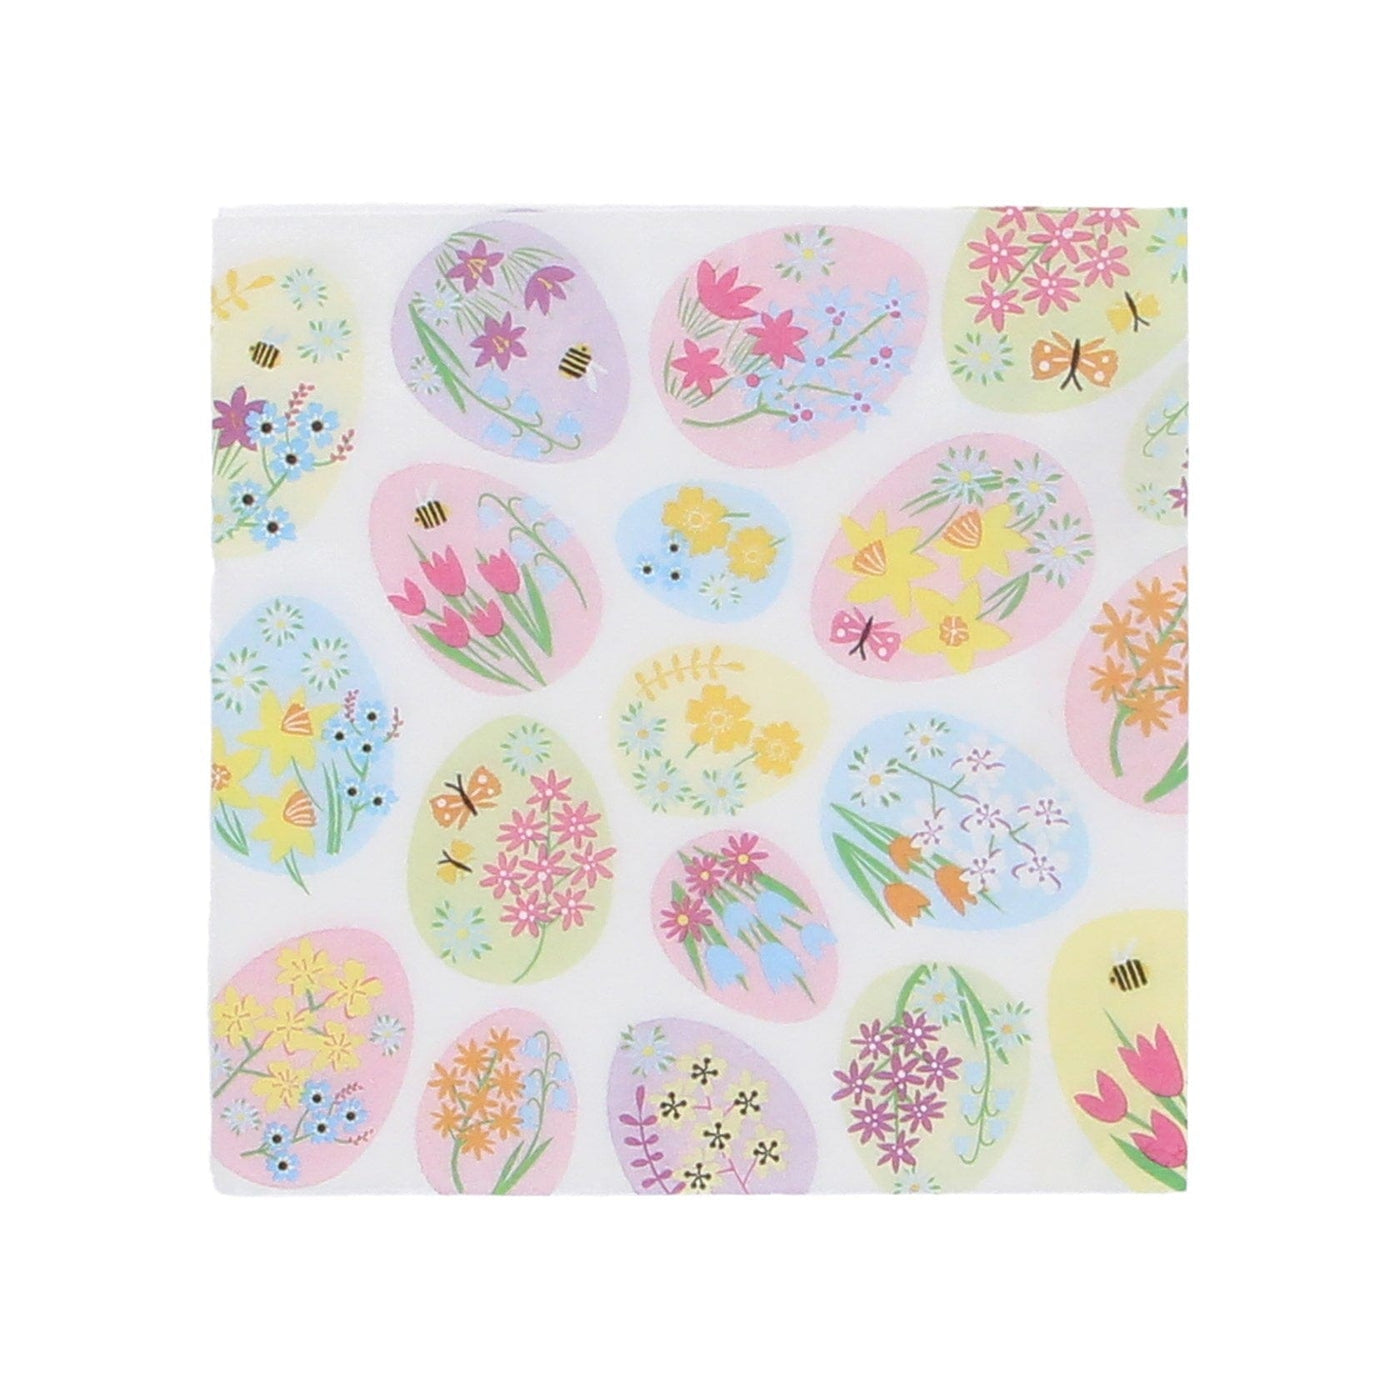 Gisela Graham Kitchen Accessories Floral Eggs Easter Themed Napkins